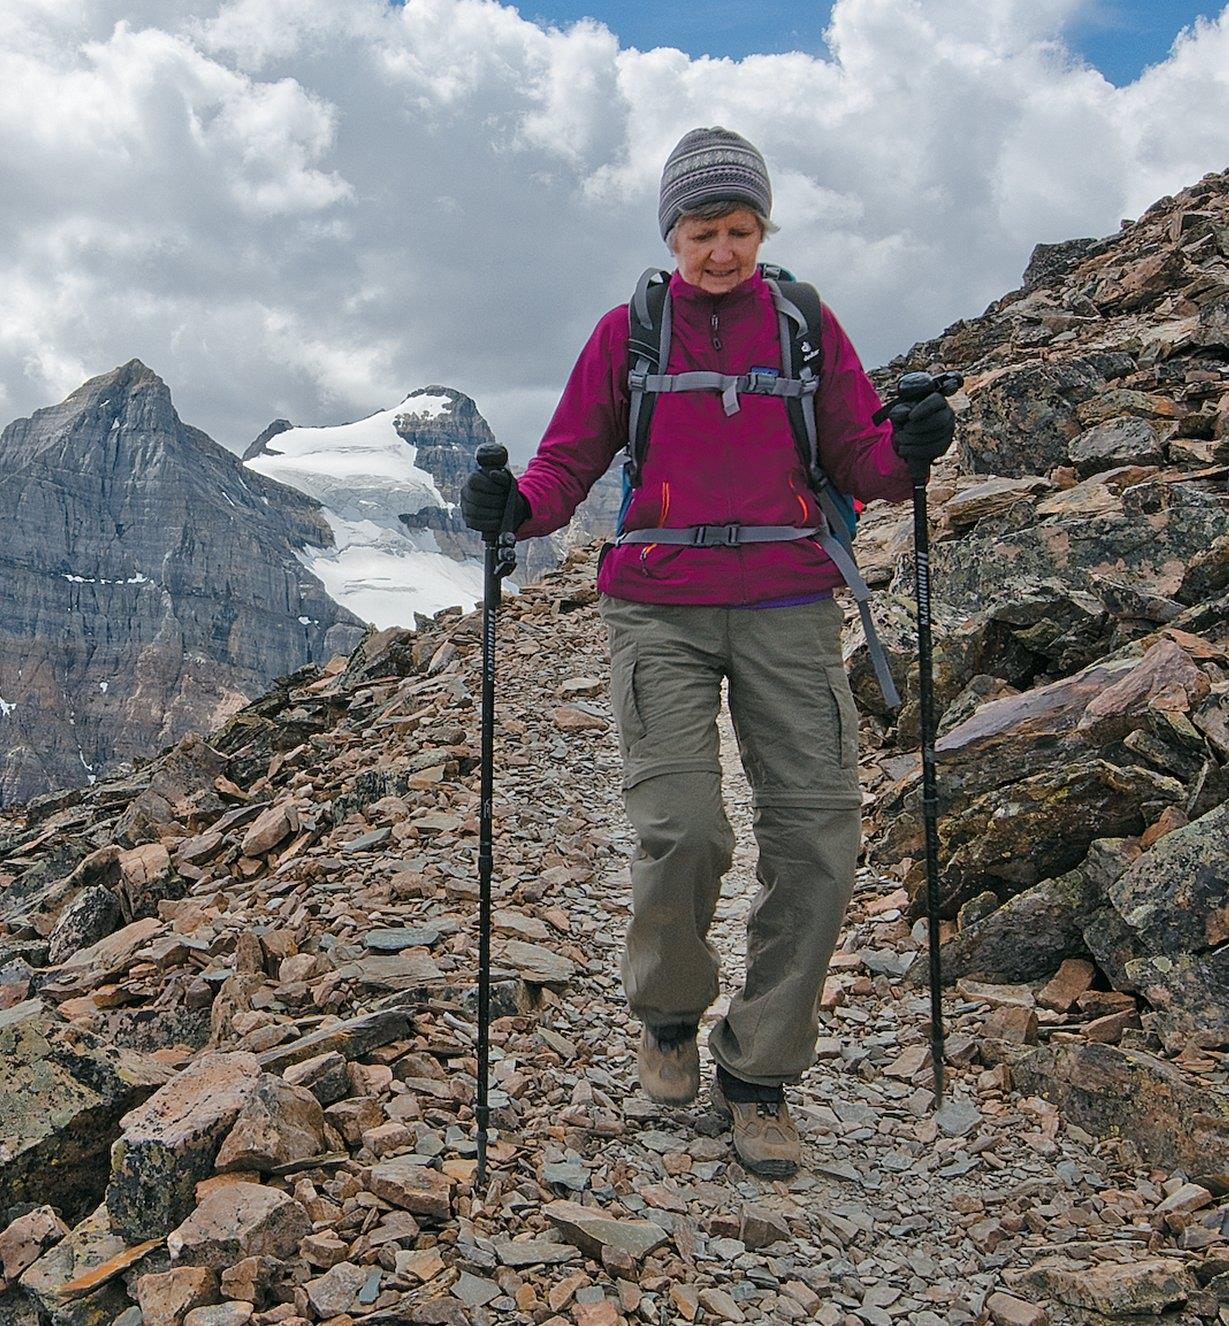 A woman hikes in the mountains with the aid of two telescoping hiking sticks